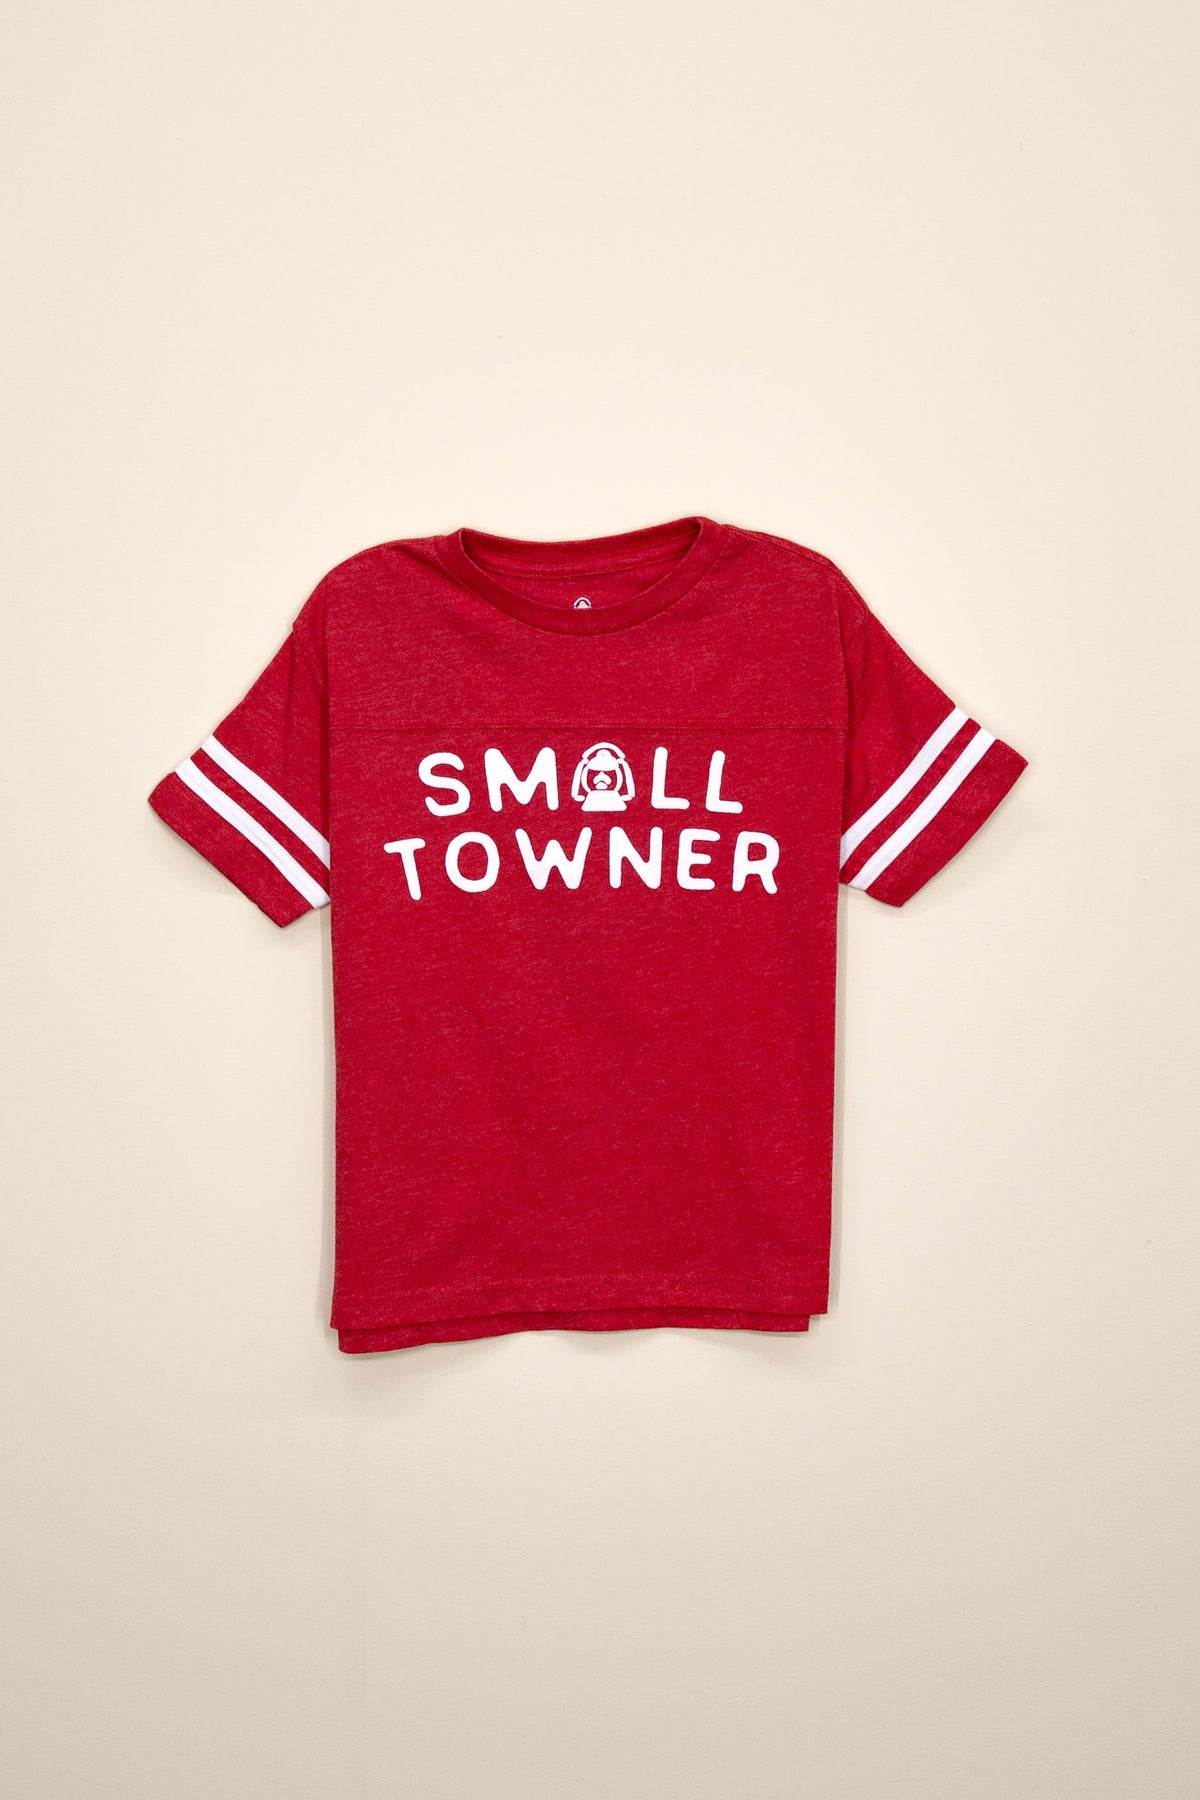 small towner kids tee